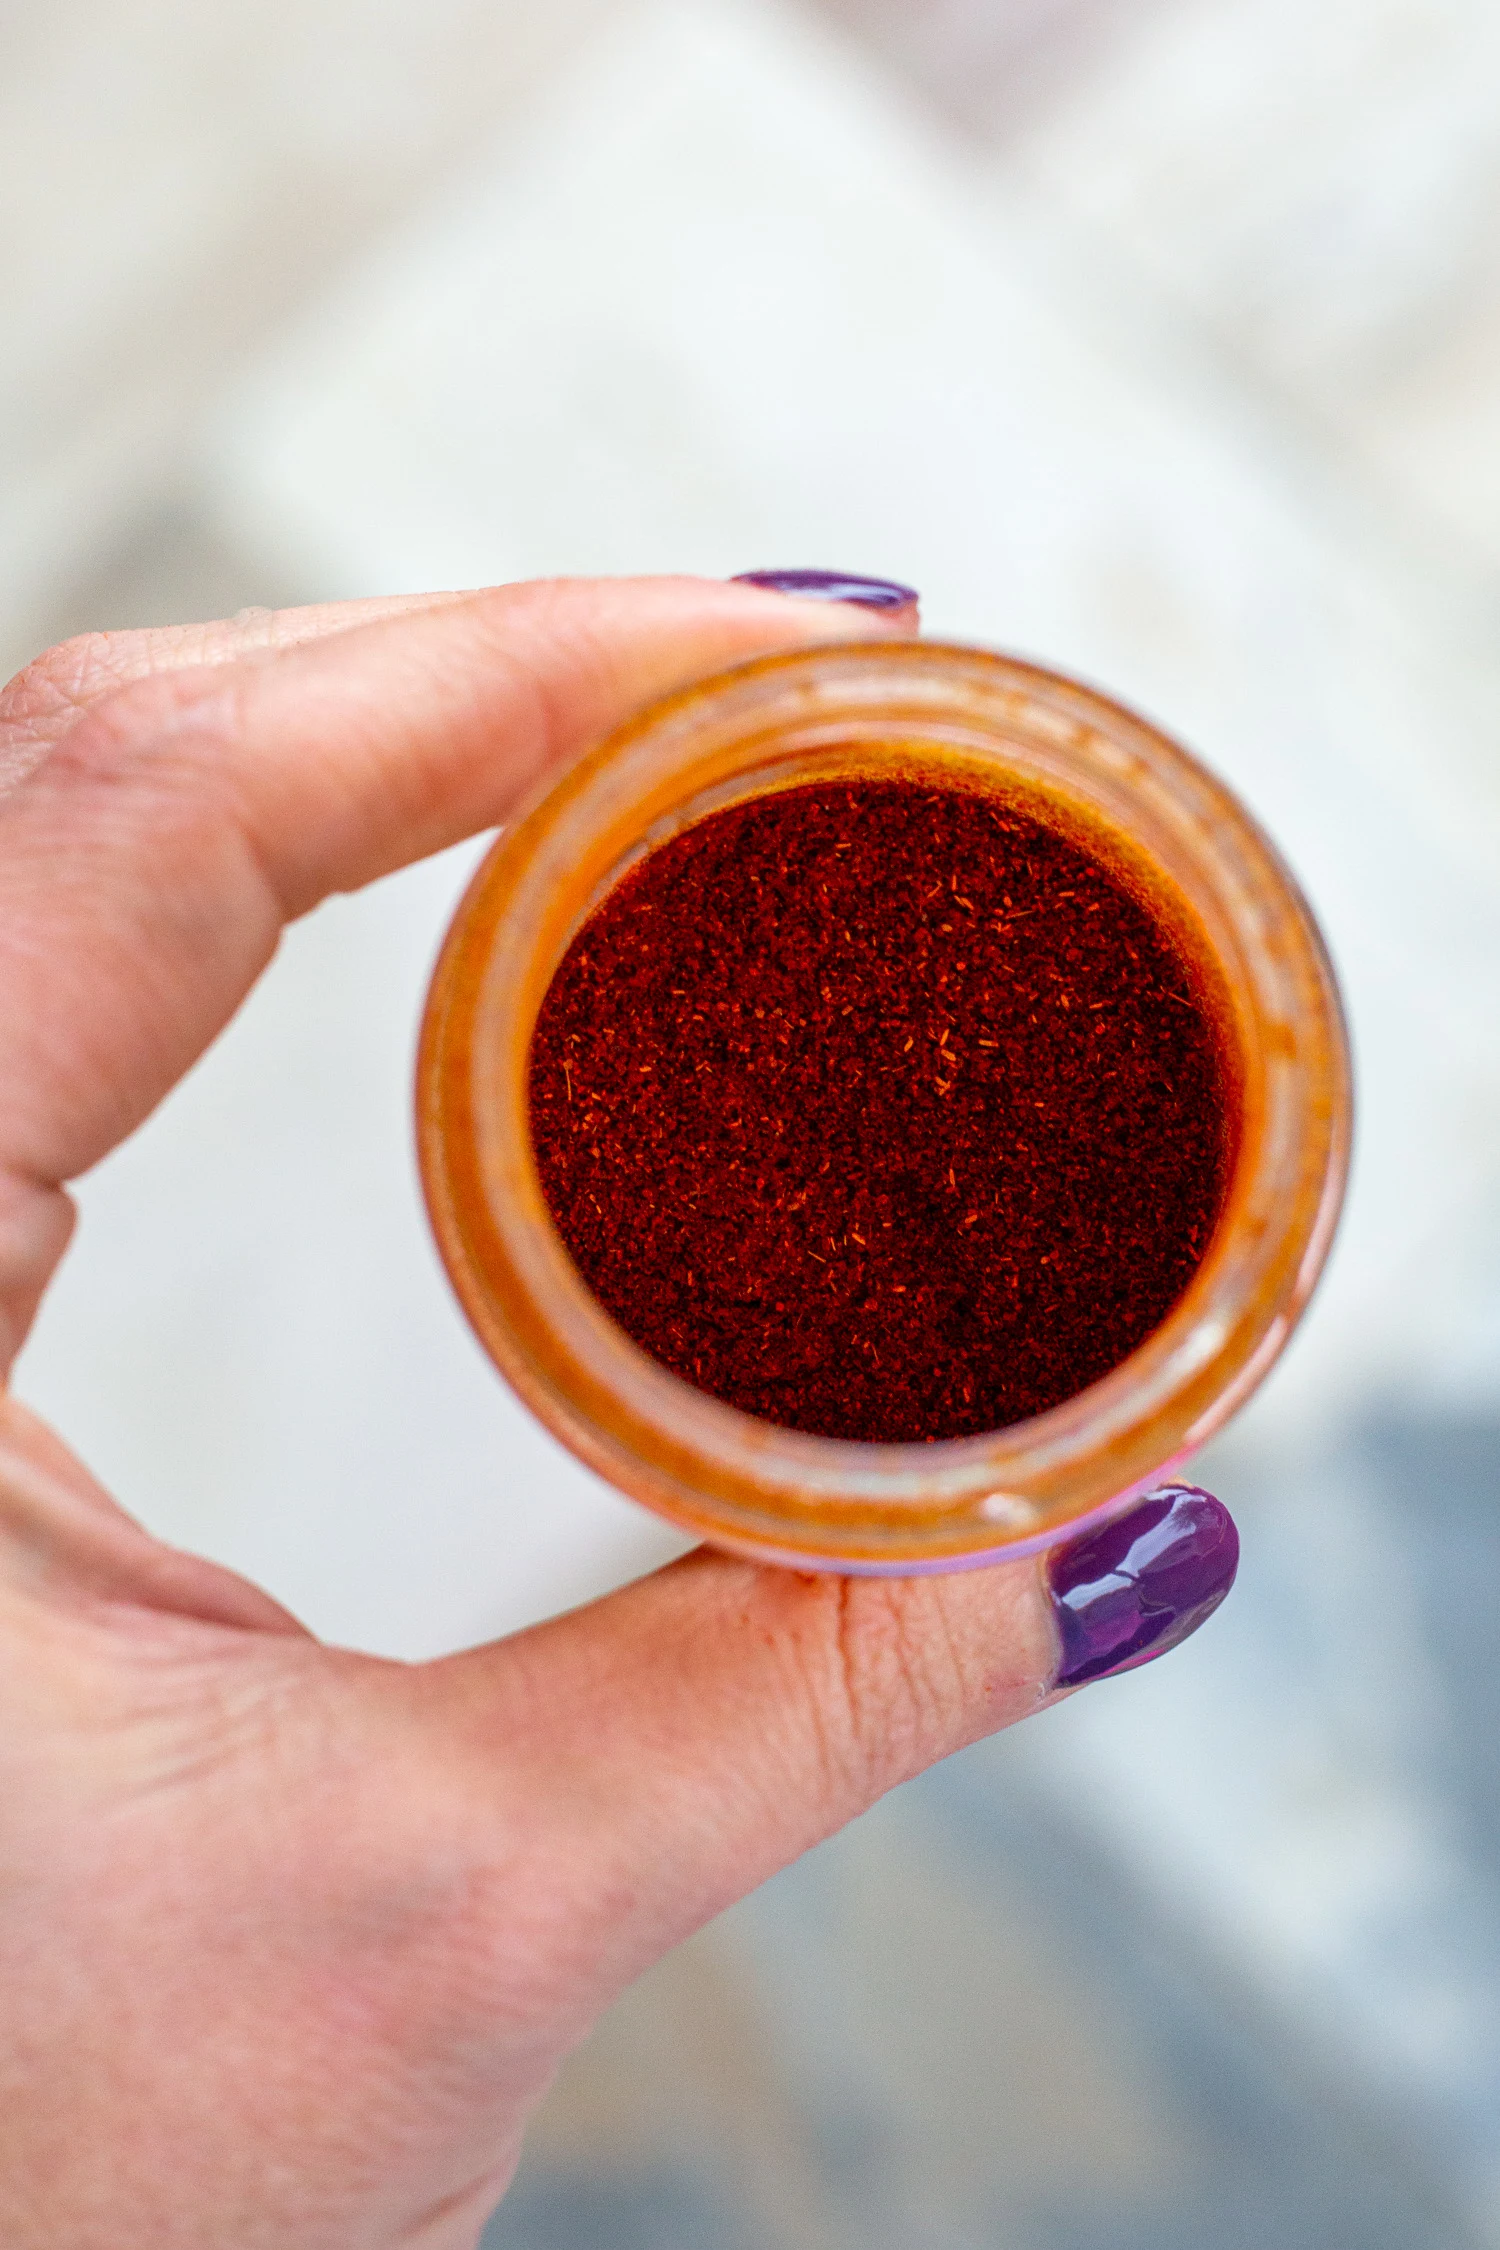 A close up of the chili powder in the bottle.